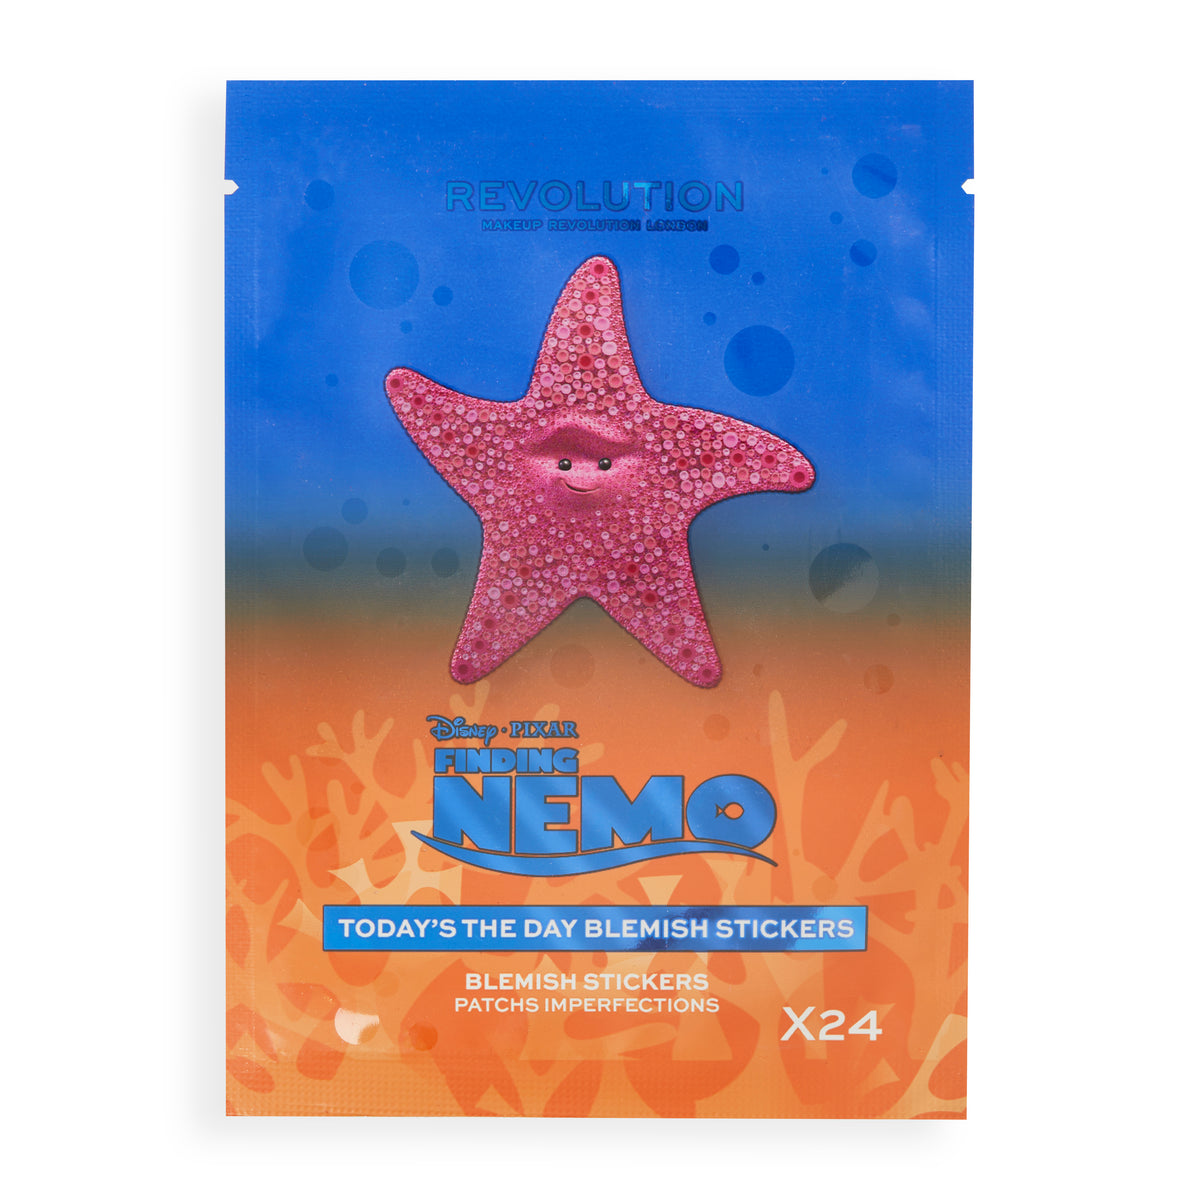 Disney & Pixar’s Finding Nemo and Revolution Today's the Day Blemish Stickers OUTLET